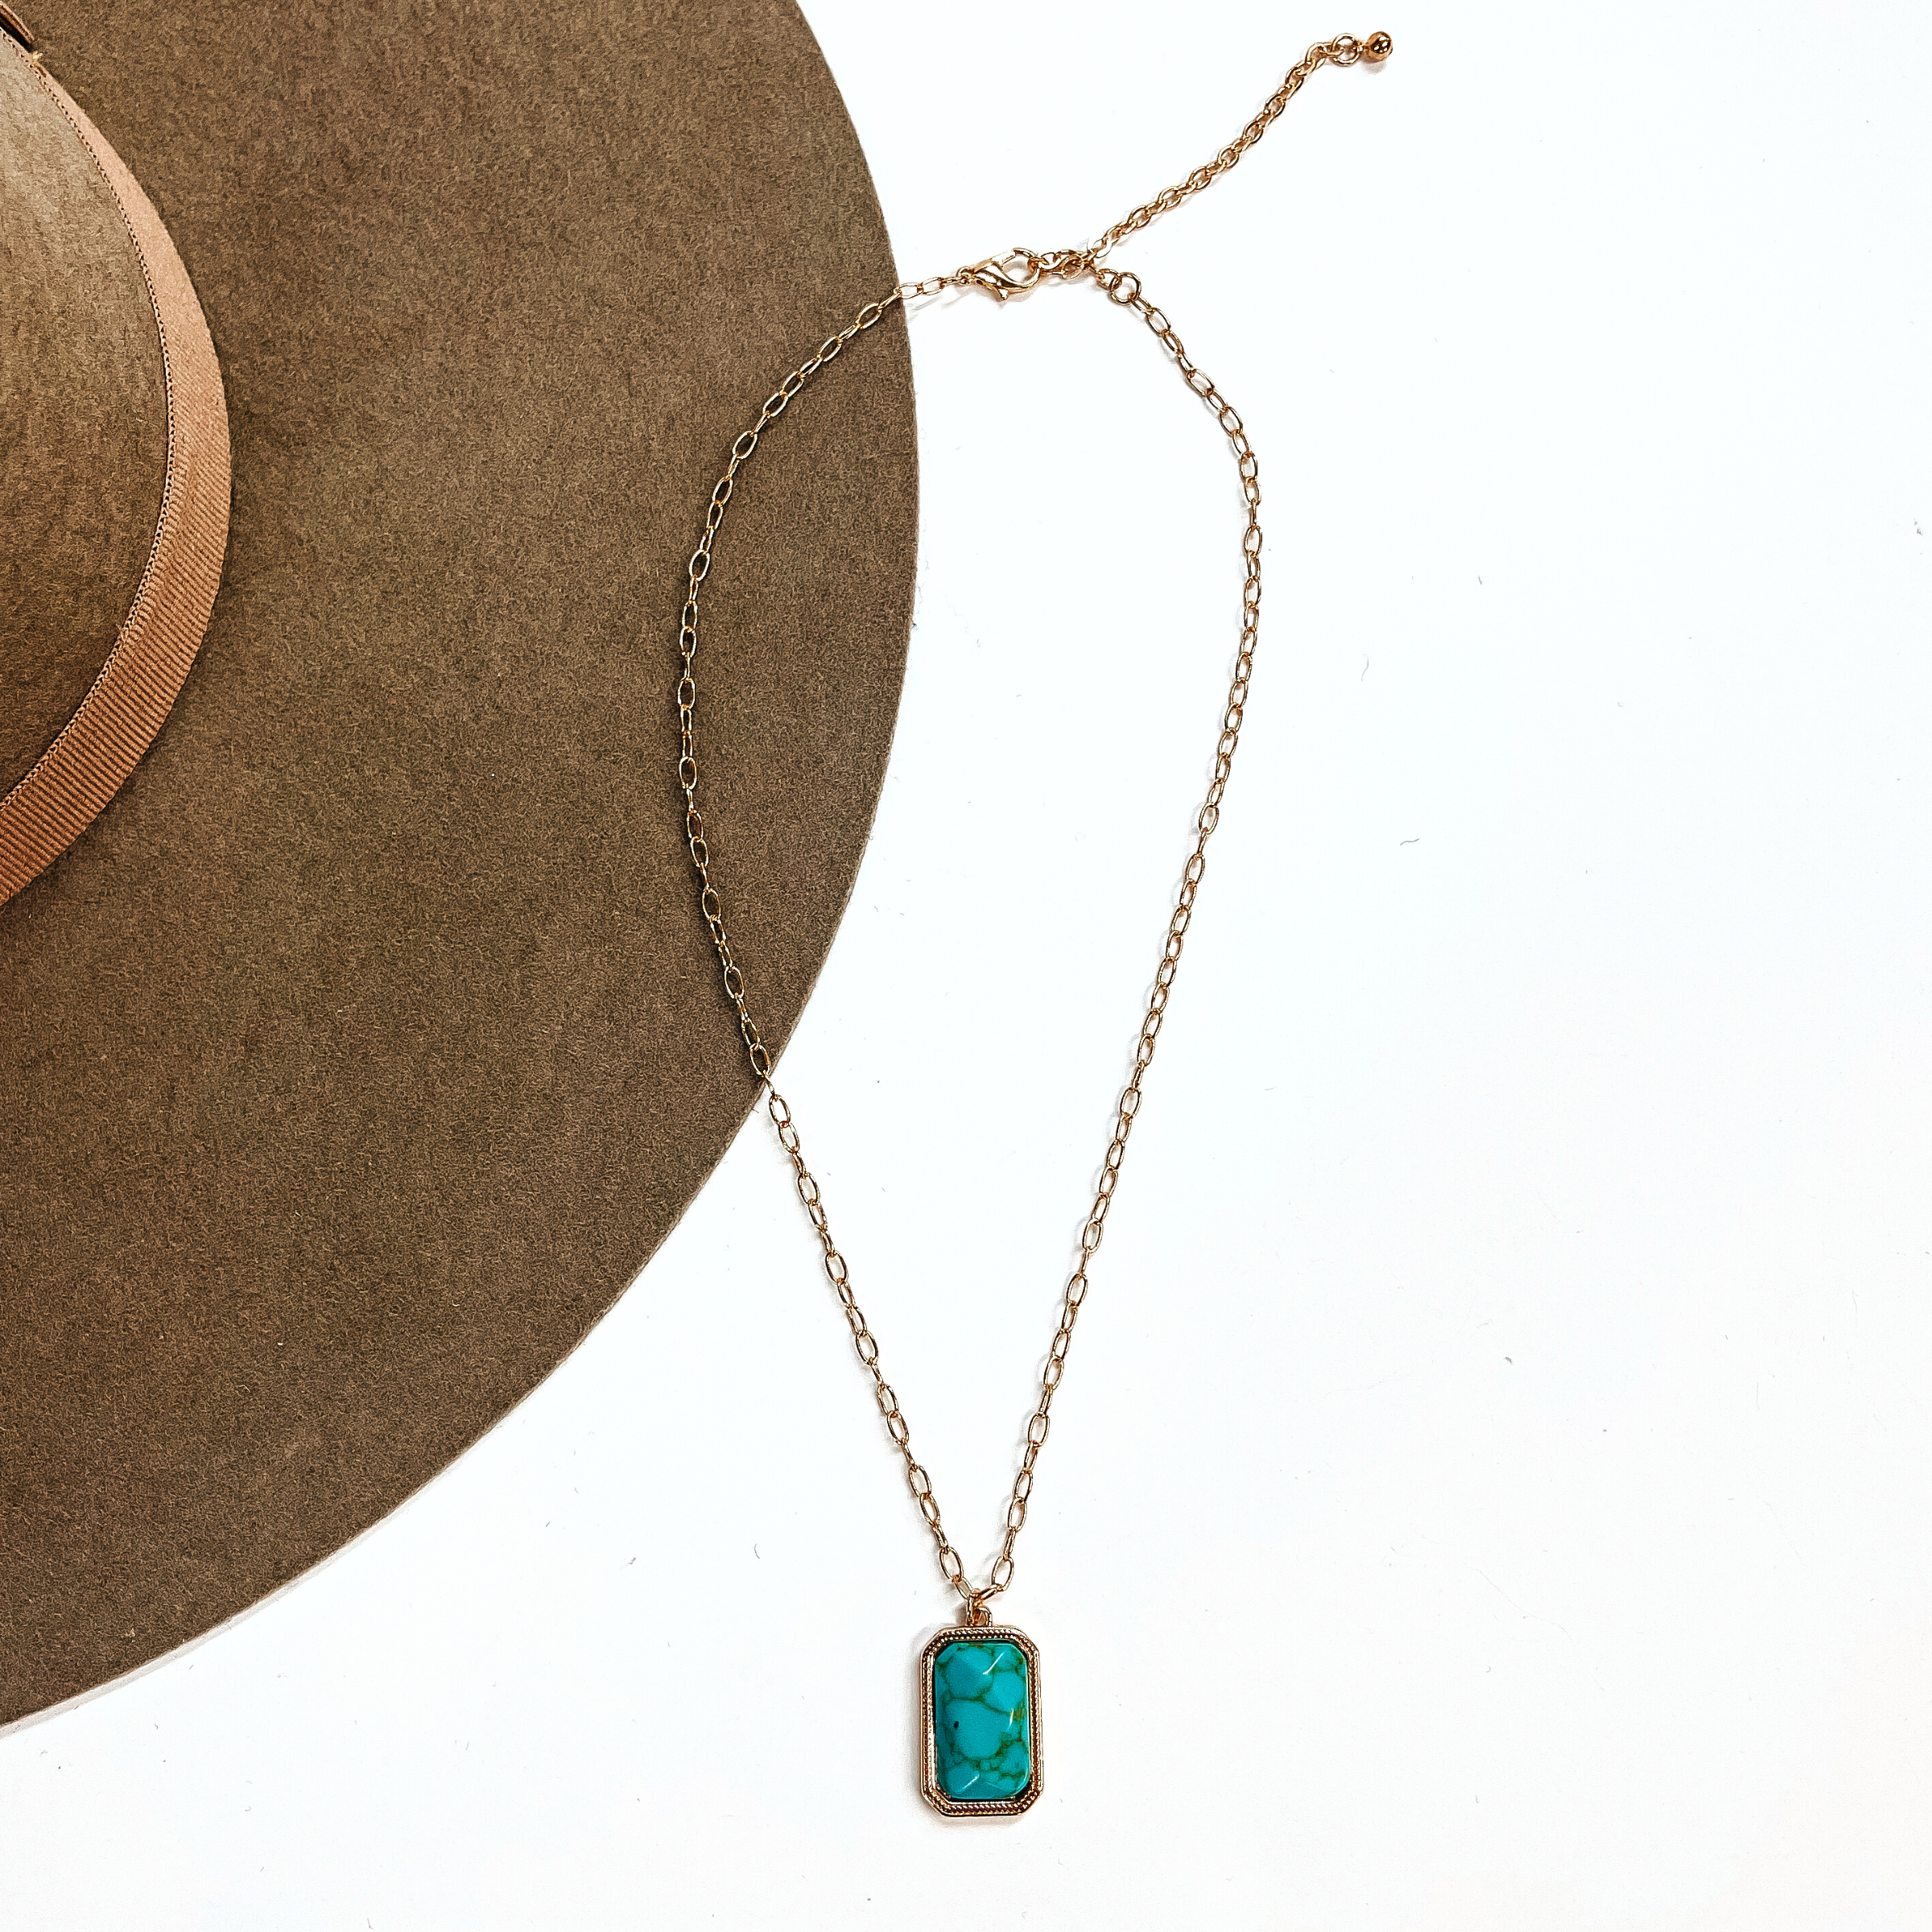 This is a thin gold tone chain necklace with a rectangle pendant in the center. The  pendant has a turqouise stone shaped as a rectangle, the stone is in a gold setting. This  necklace is laying on a white background and on a light brown felt hat brim.